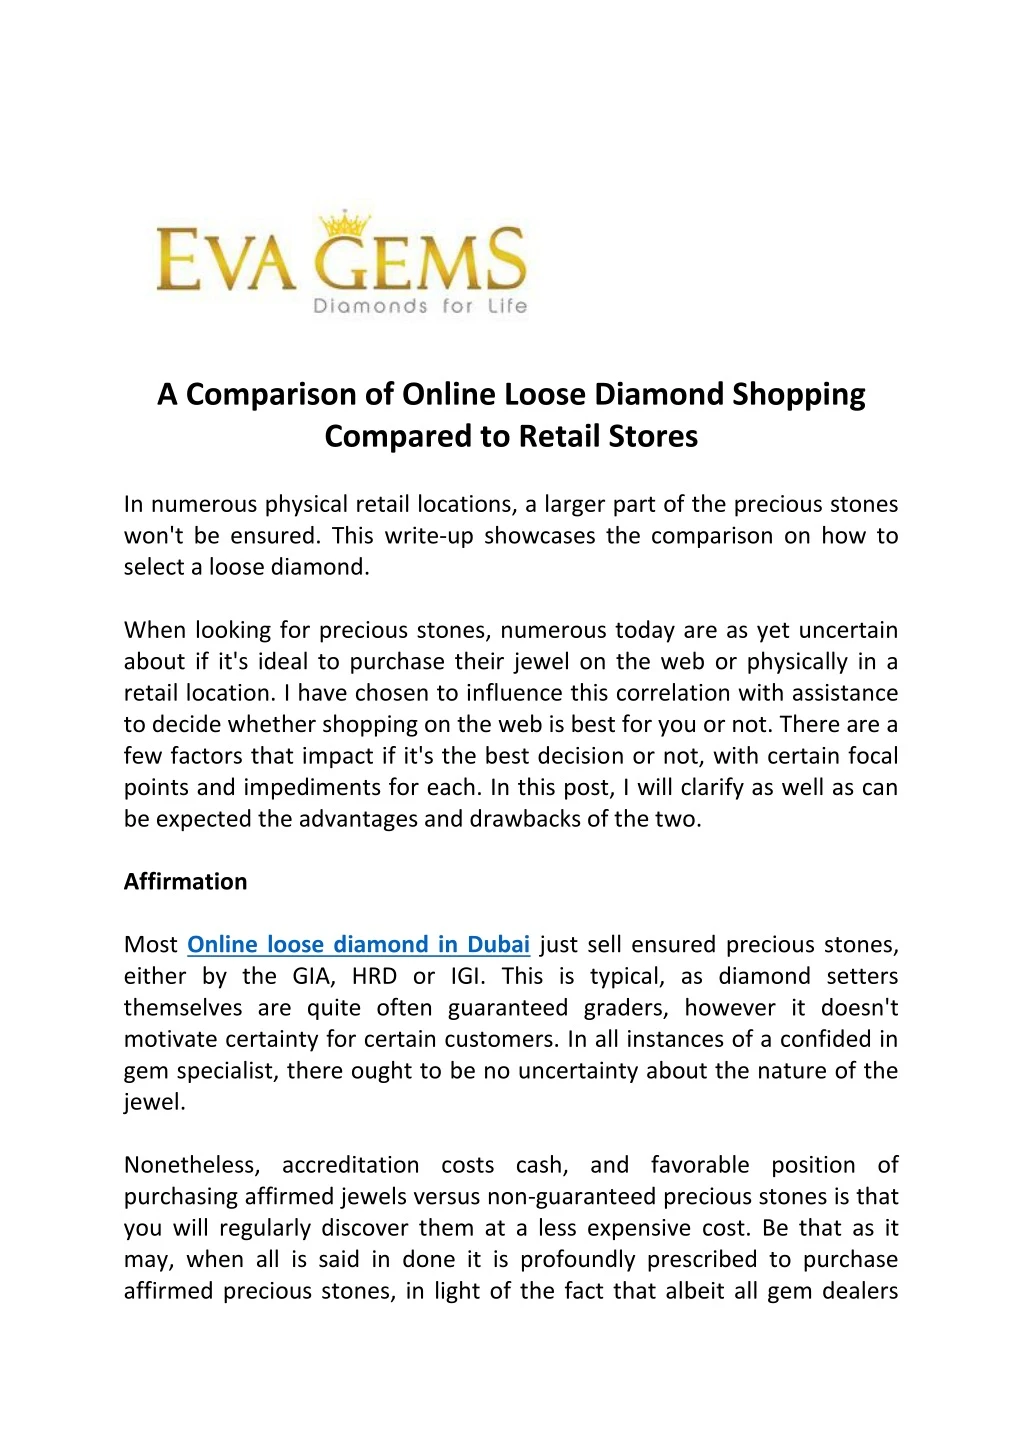 a comparison of online loose diamond shopping